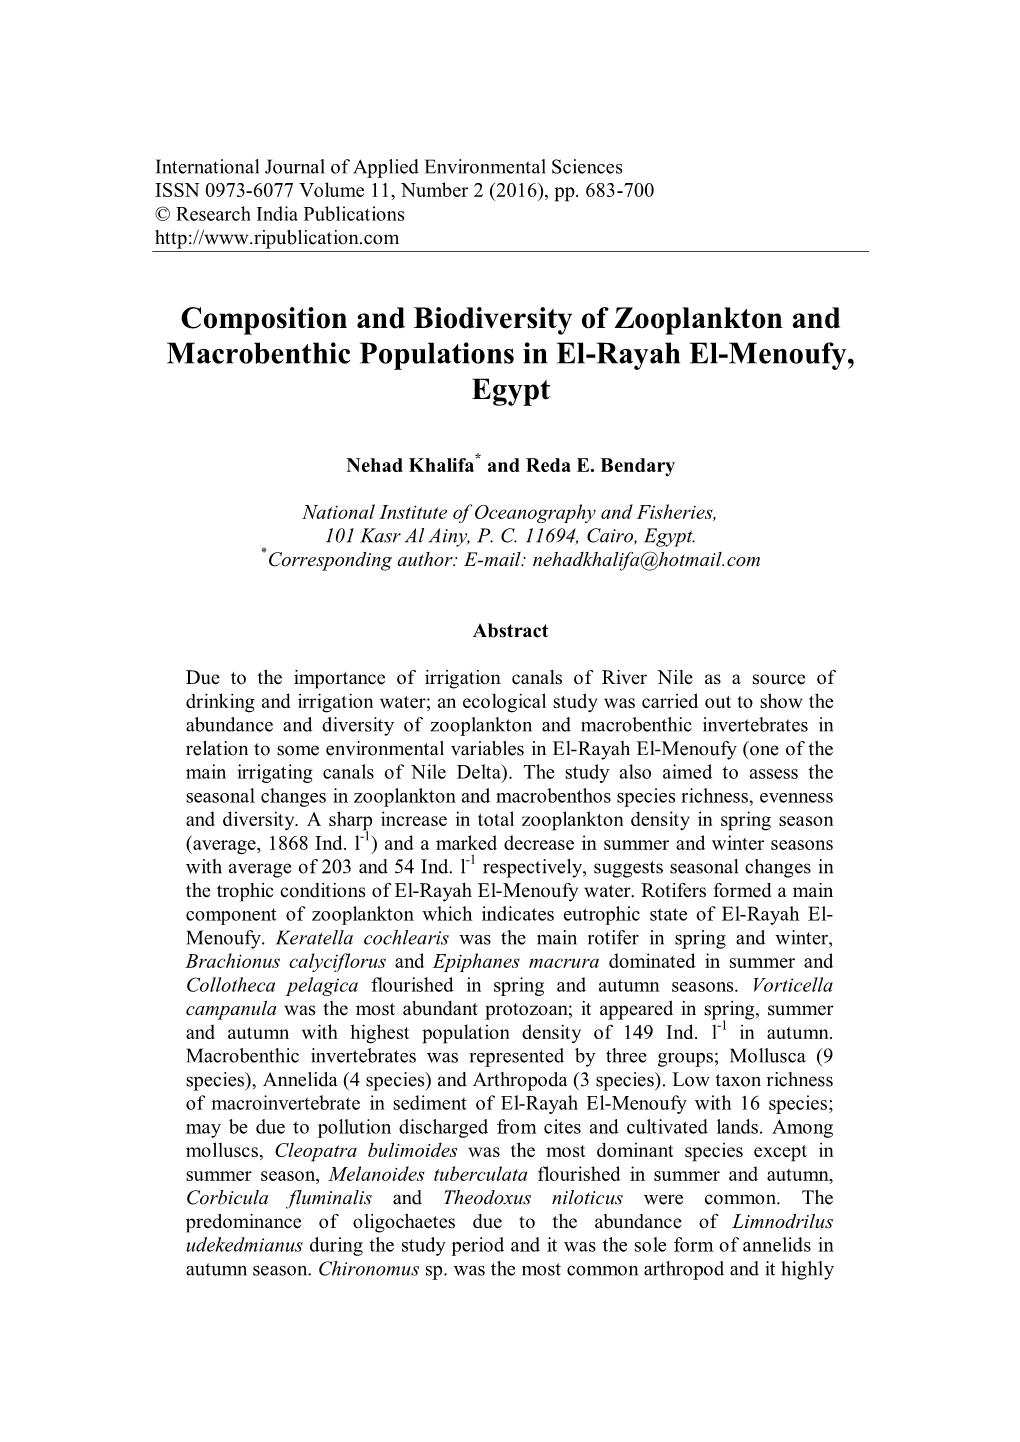 Composition and Biodiversity of Zooplankton and Macrobenthic Populations in El-Rayah El-Menoufy, Egypt